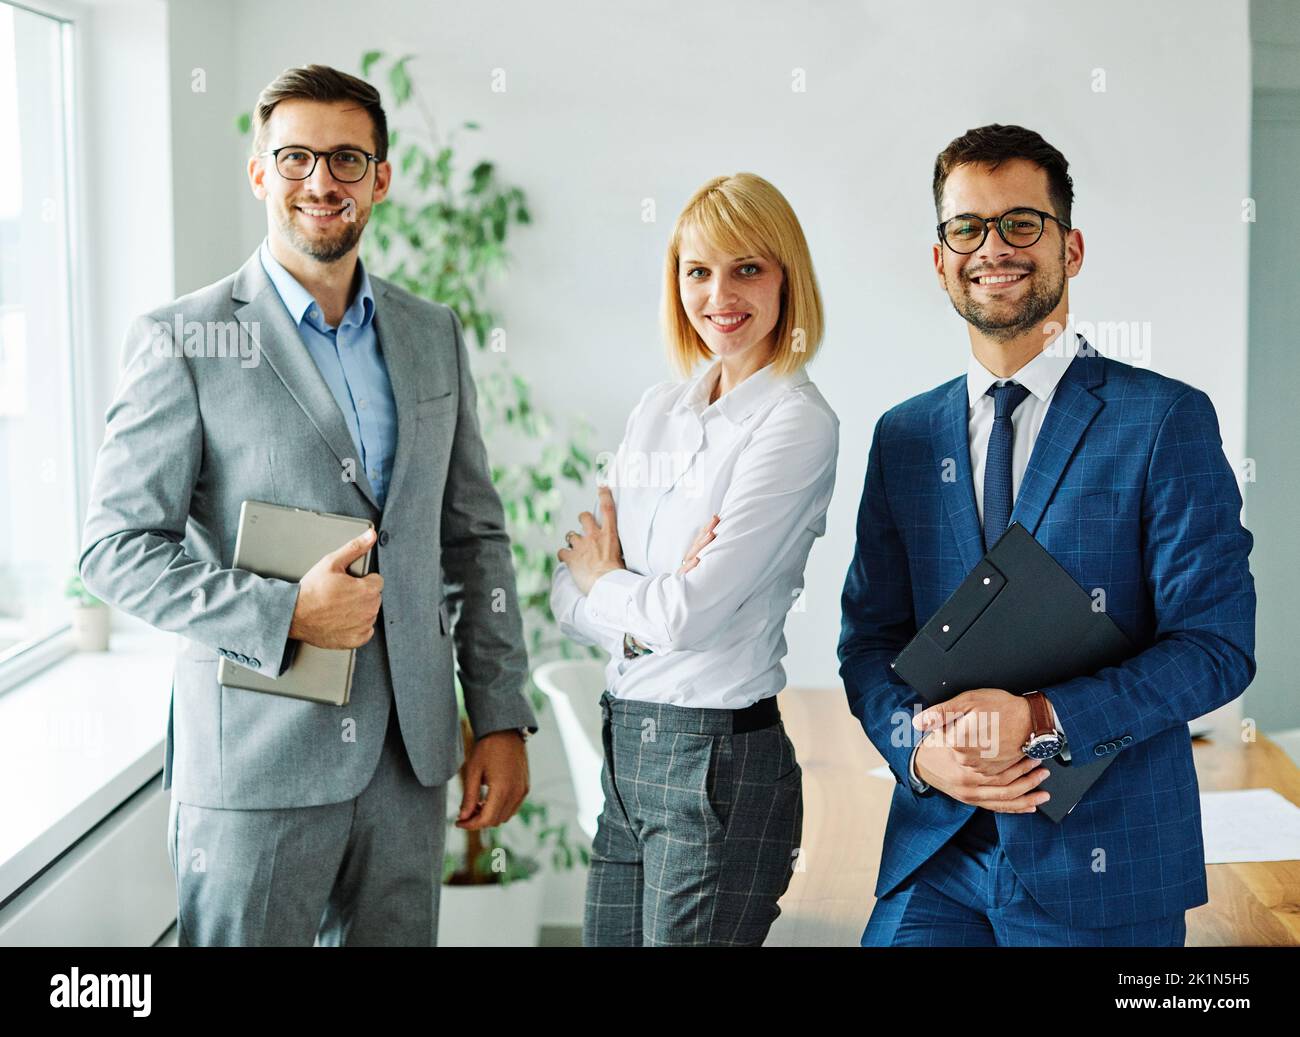 young business people meeting office teamwork corporate portrait beautiful businesswoman businessman colleague posing businesspeople Stock Photo